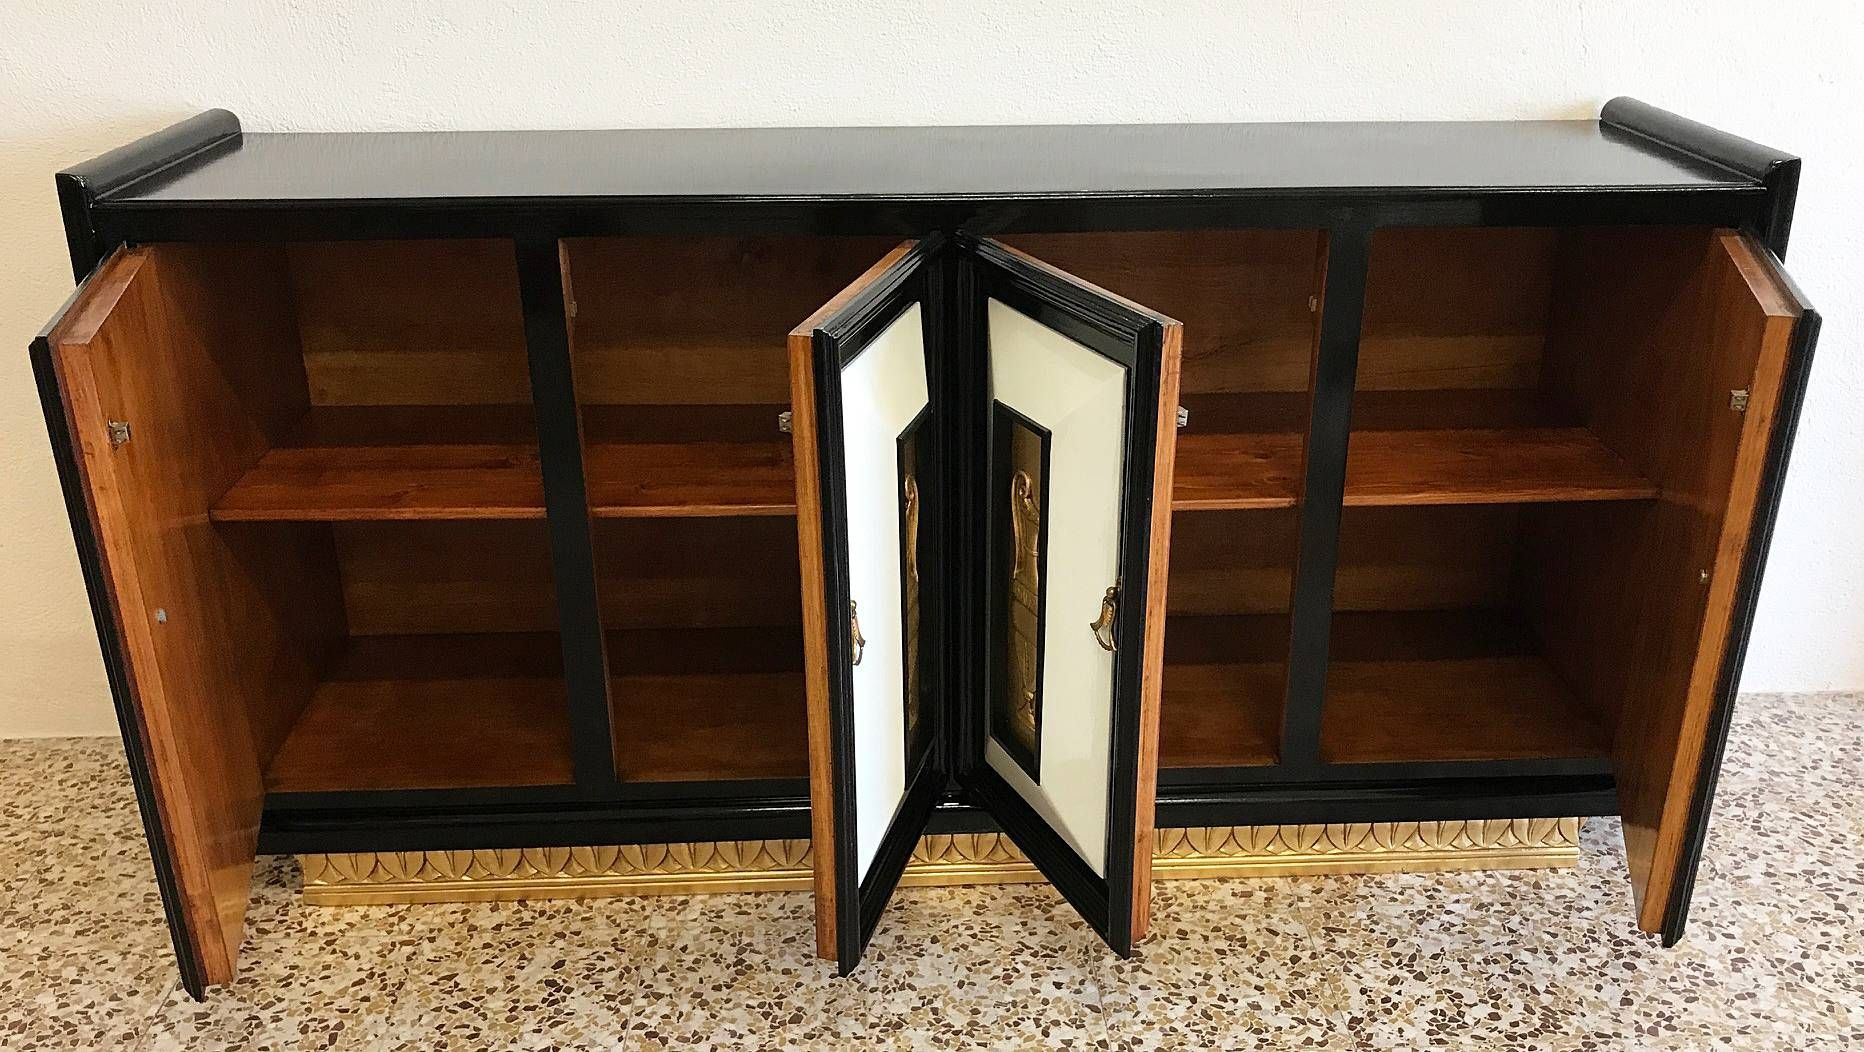 Italian Art Deco Sideboard, 1940s For Sale At Pamono With Regard To Art Deco Sideboards (View 10 of 15)